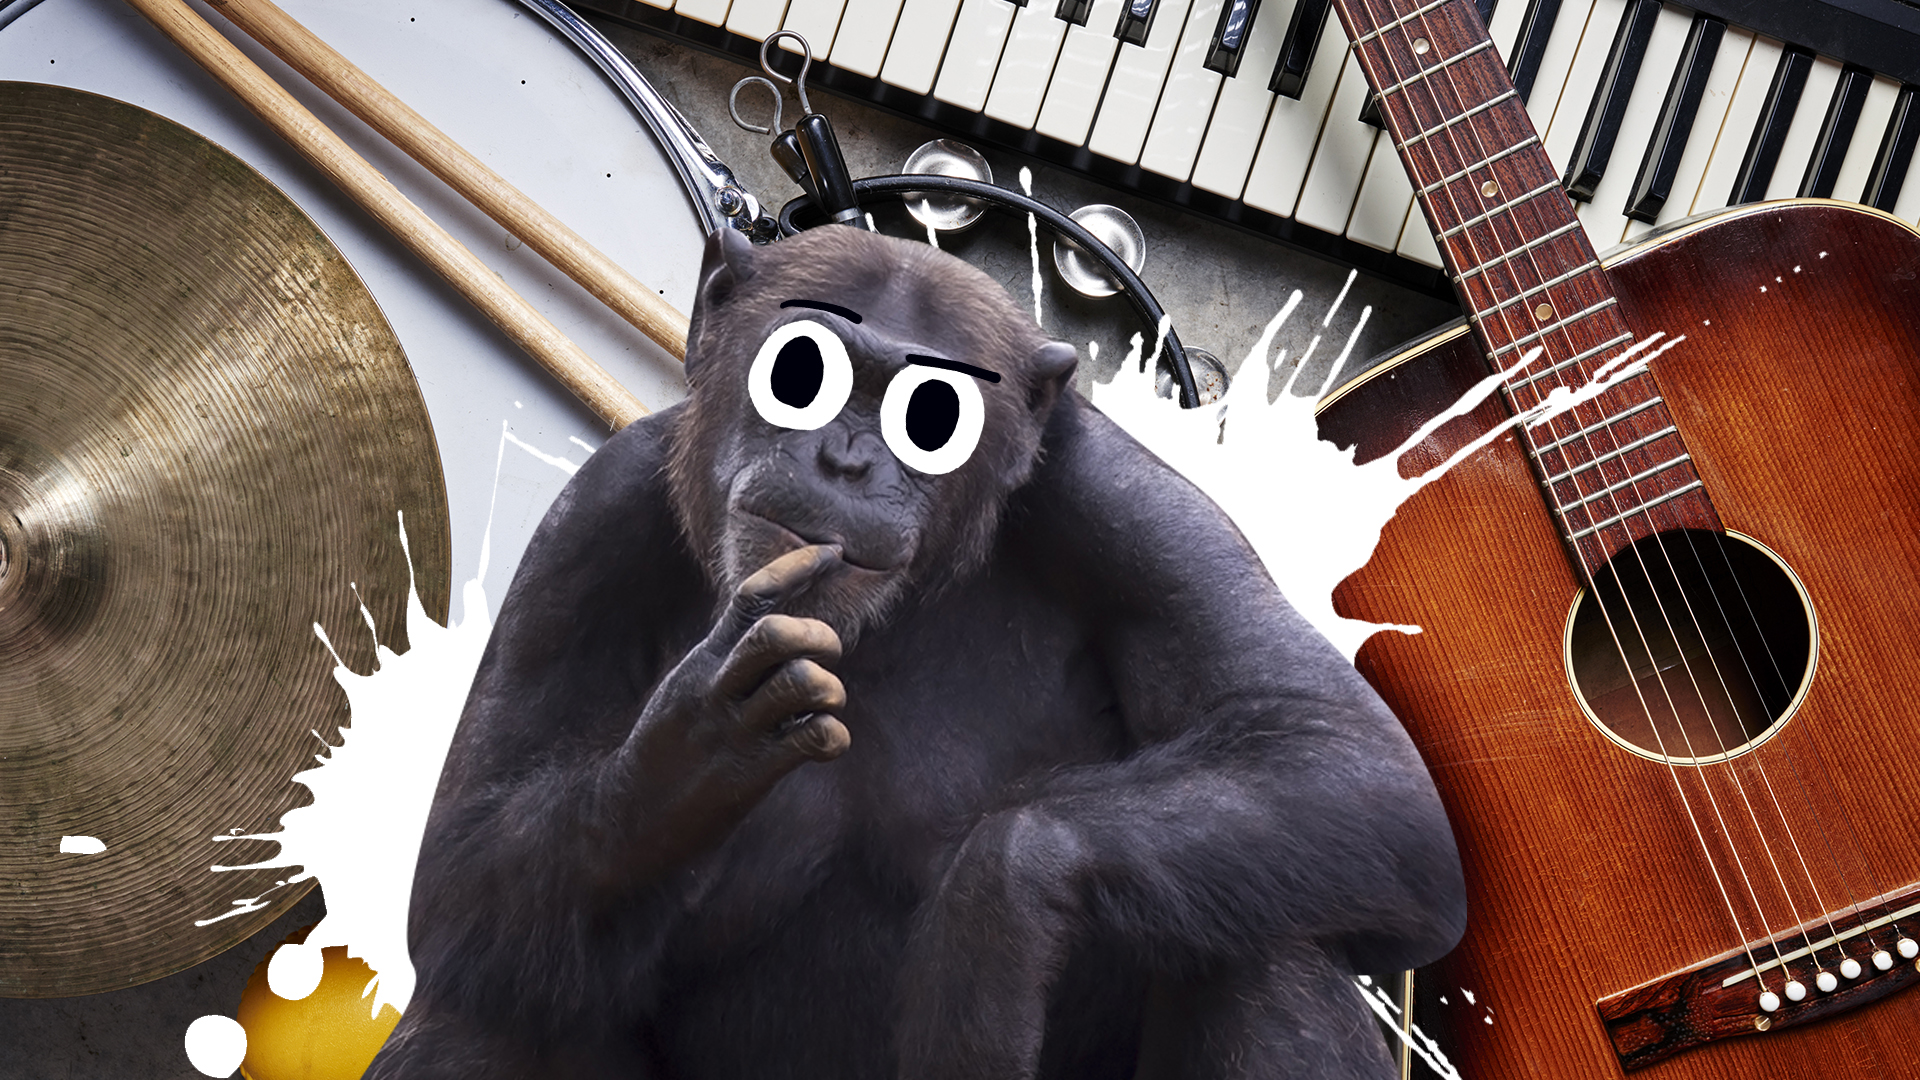 A chimp surrounded by musical instruments